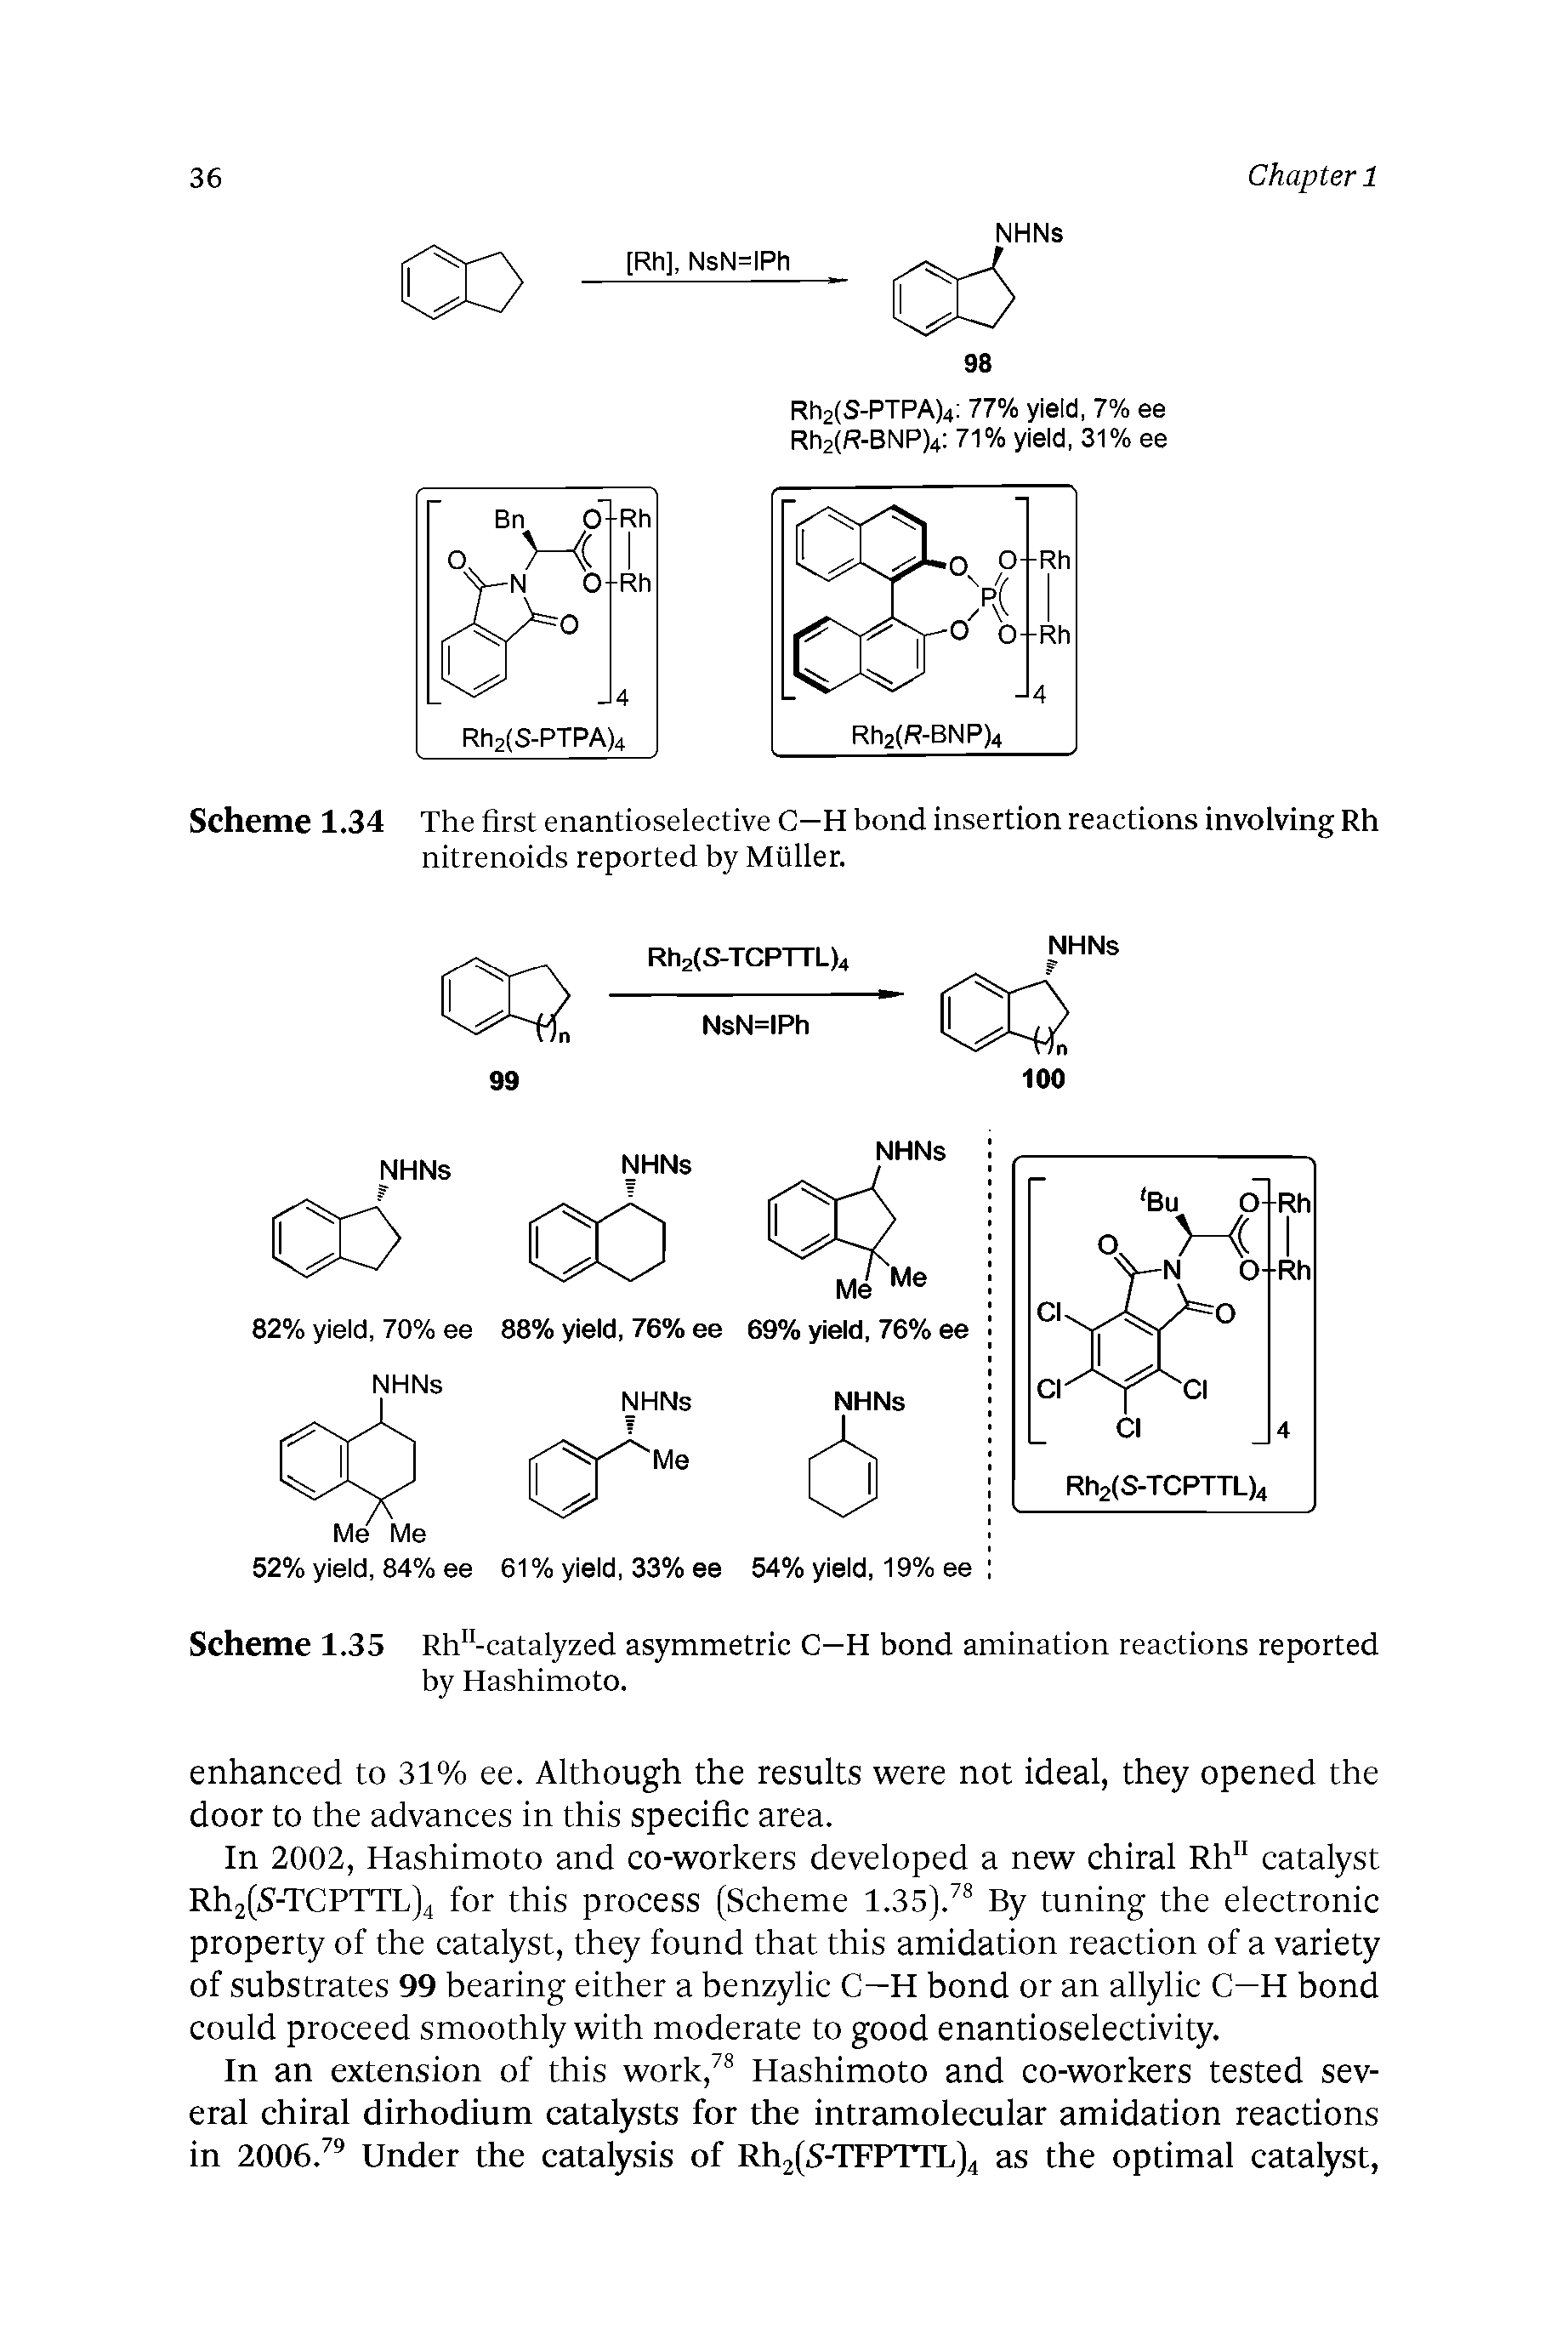 Scheme 1.34 The first enantioselective C-H bond insertion reactions involving Rh nitrenoids reported by Muller.